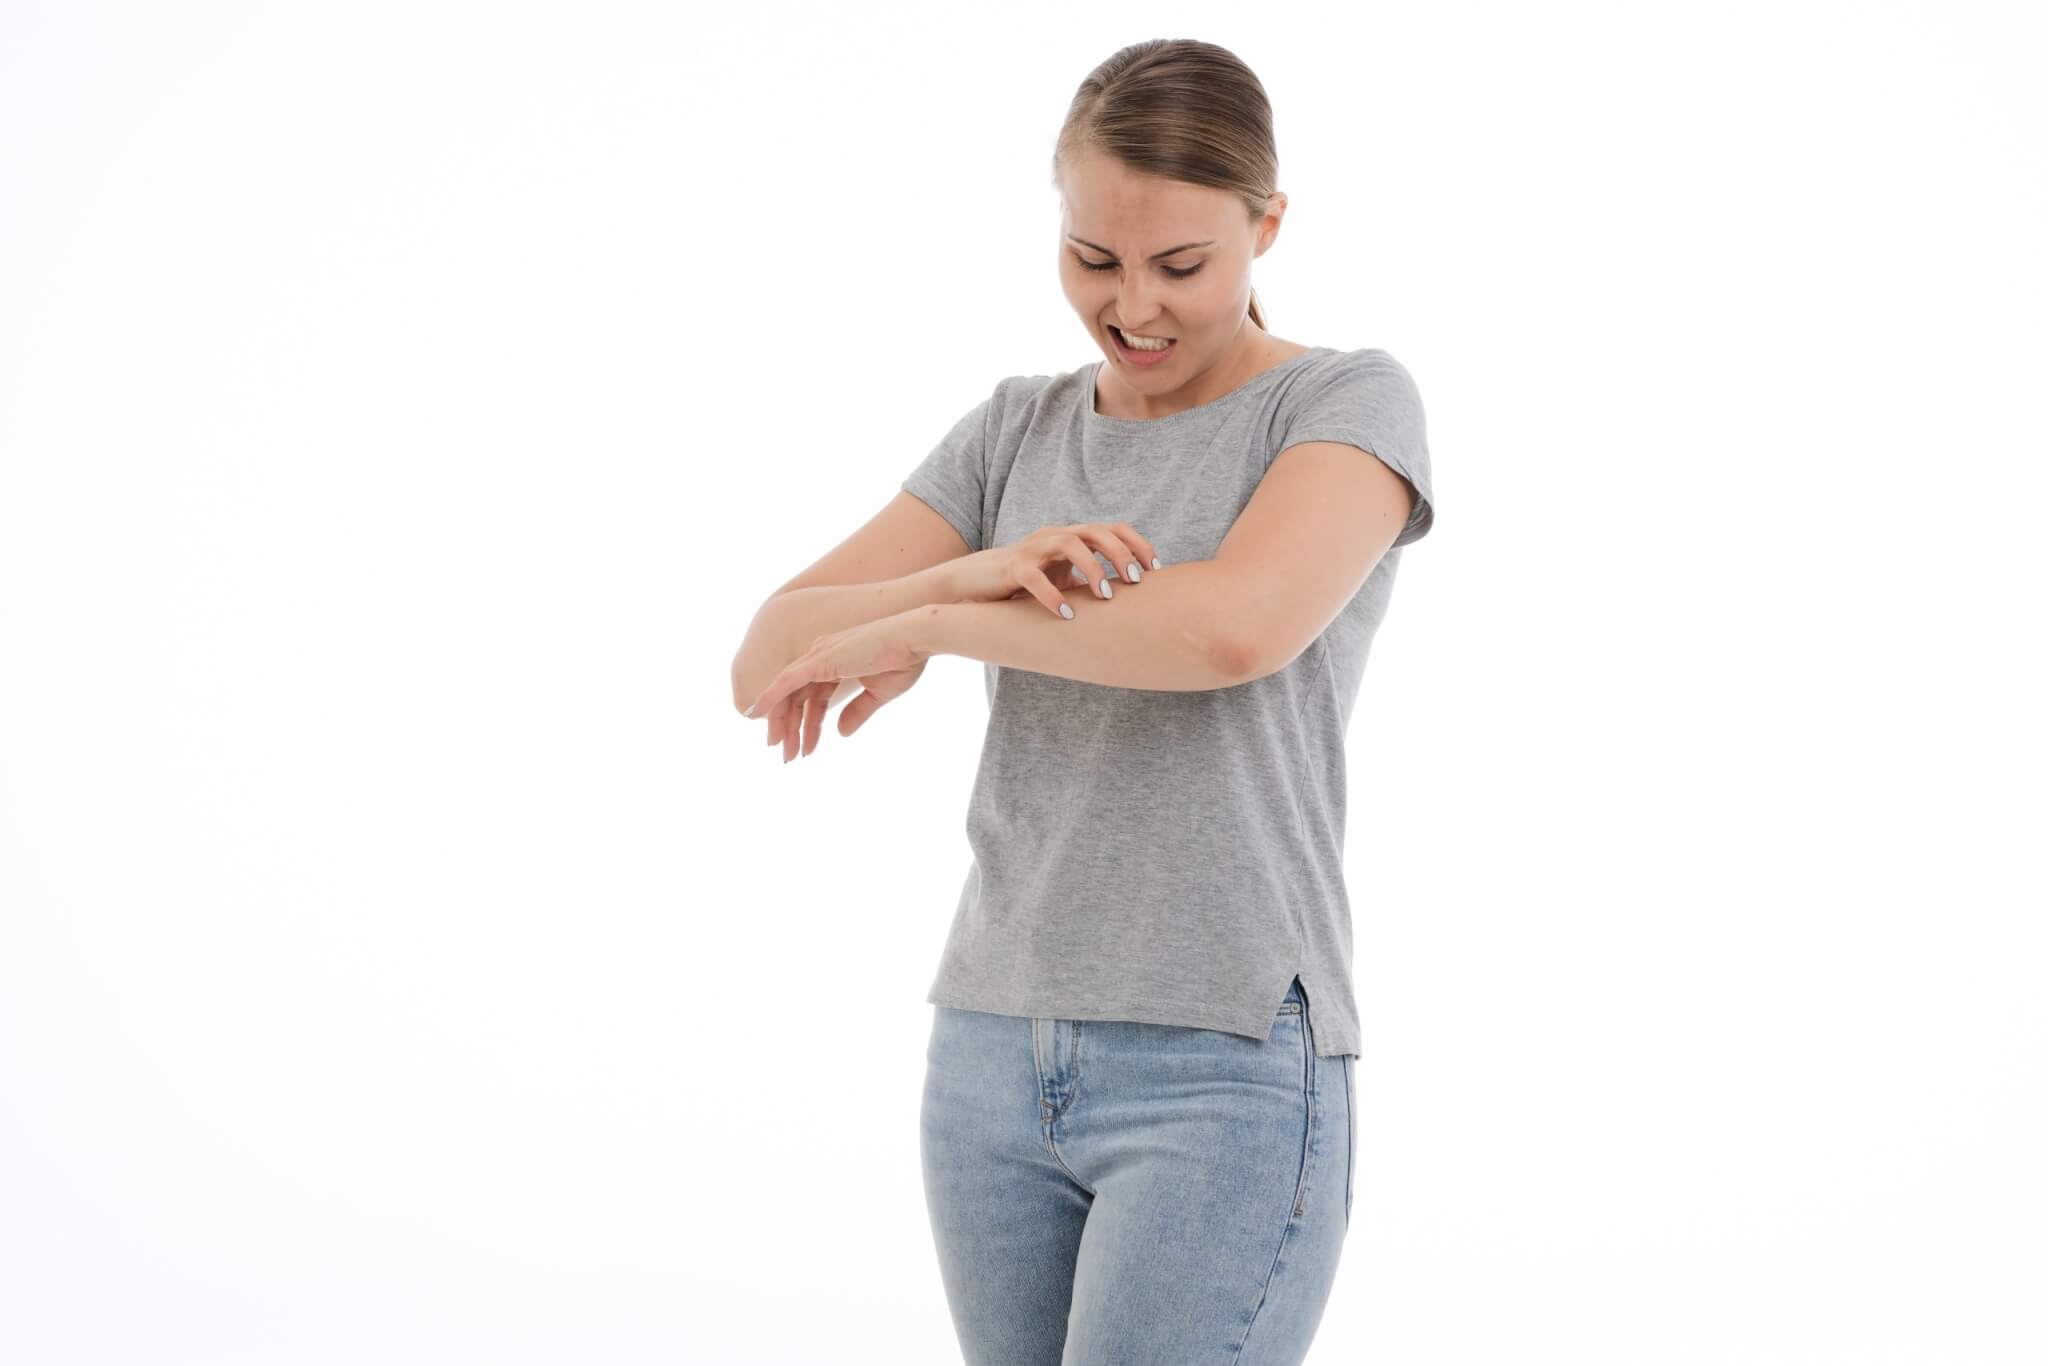 Woman scratching an itch on her arm